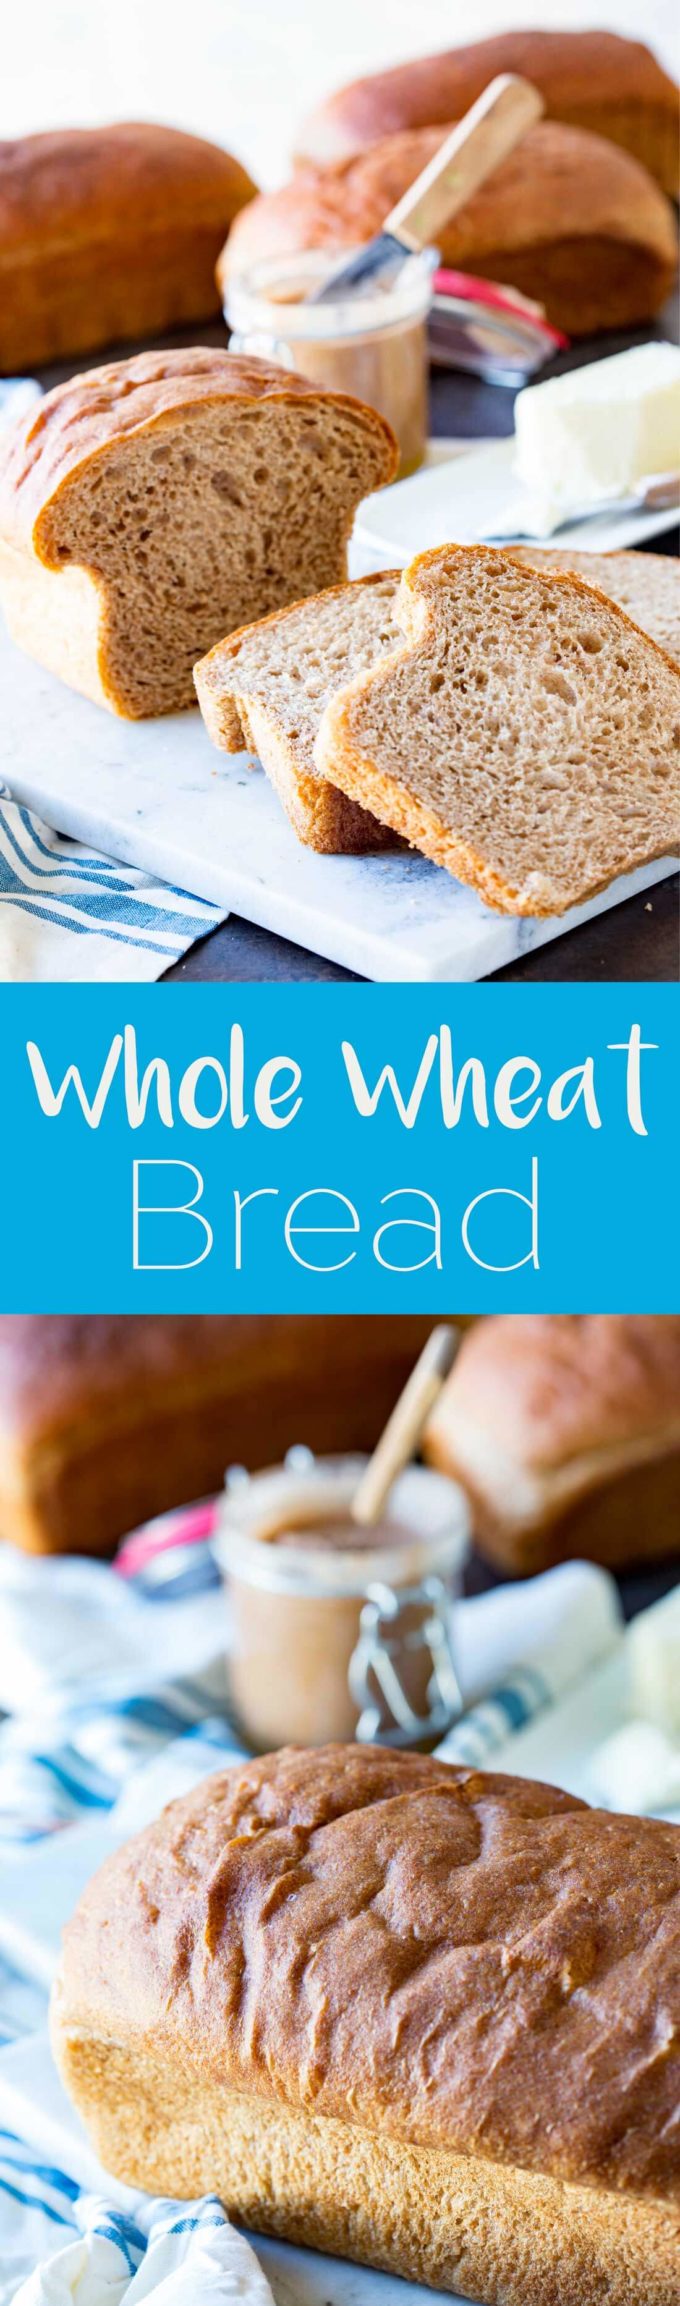 Honey Whole Wheat bread made from scratch for a hearty, delicious loaf